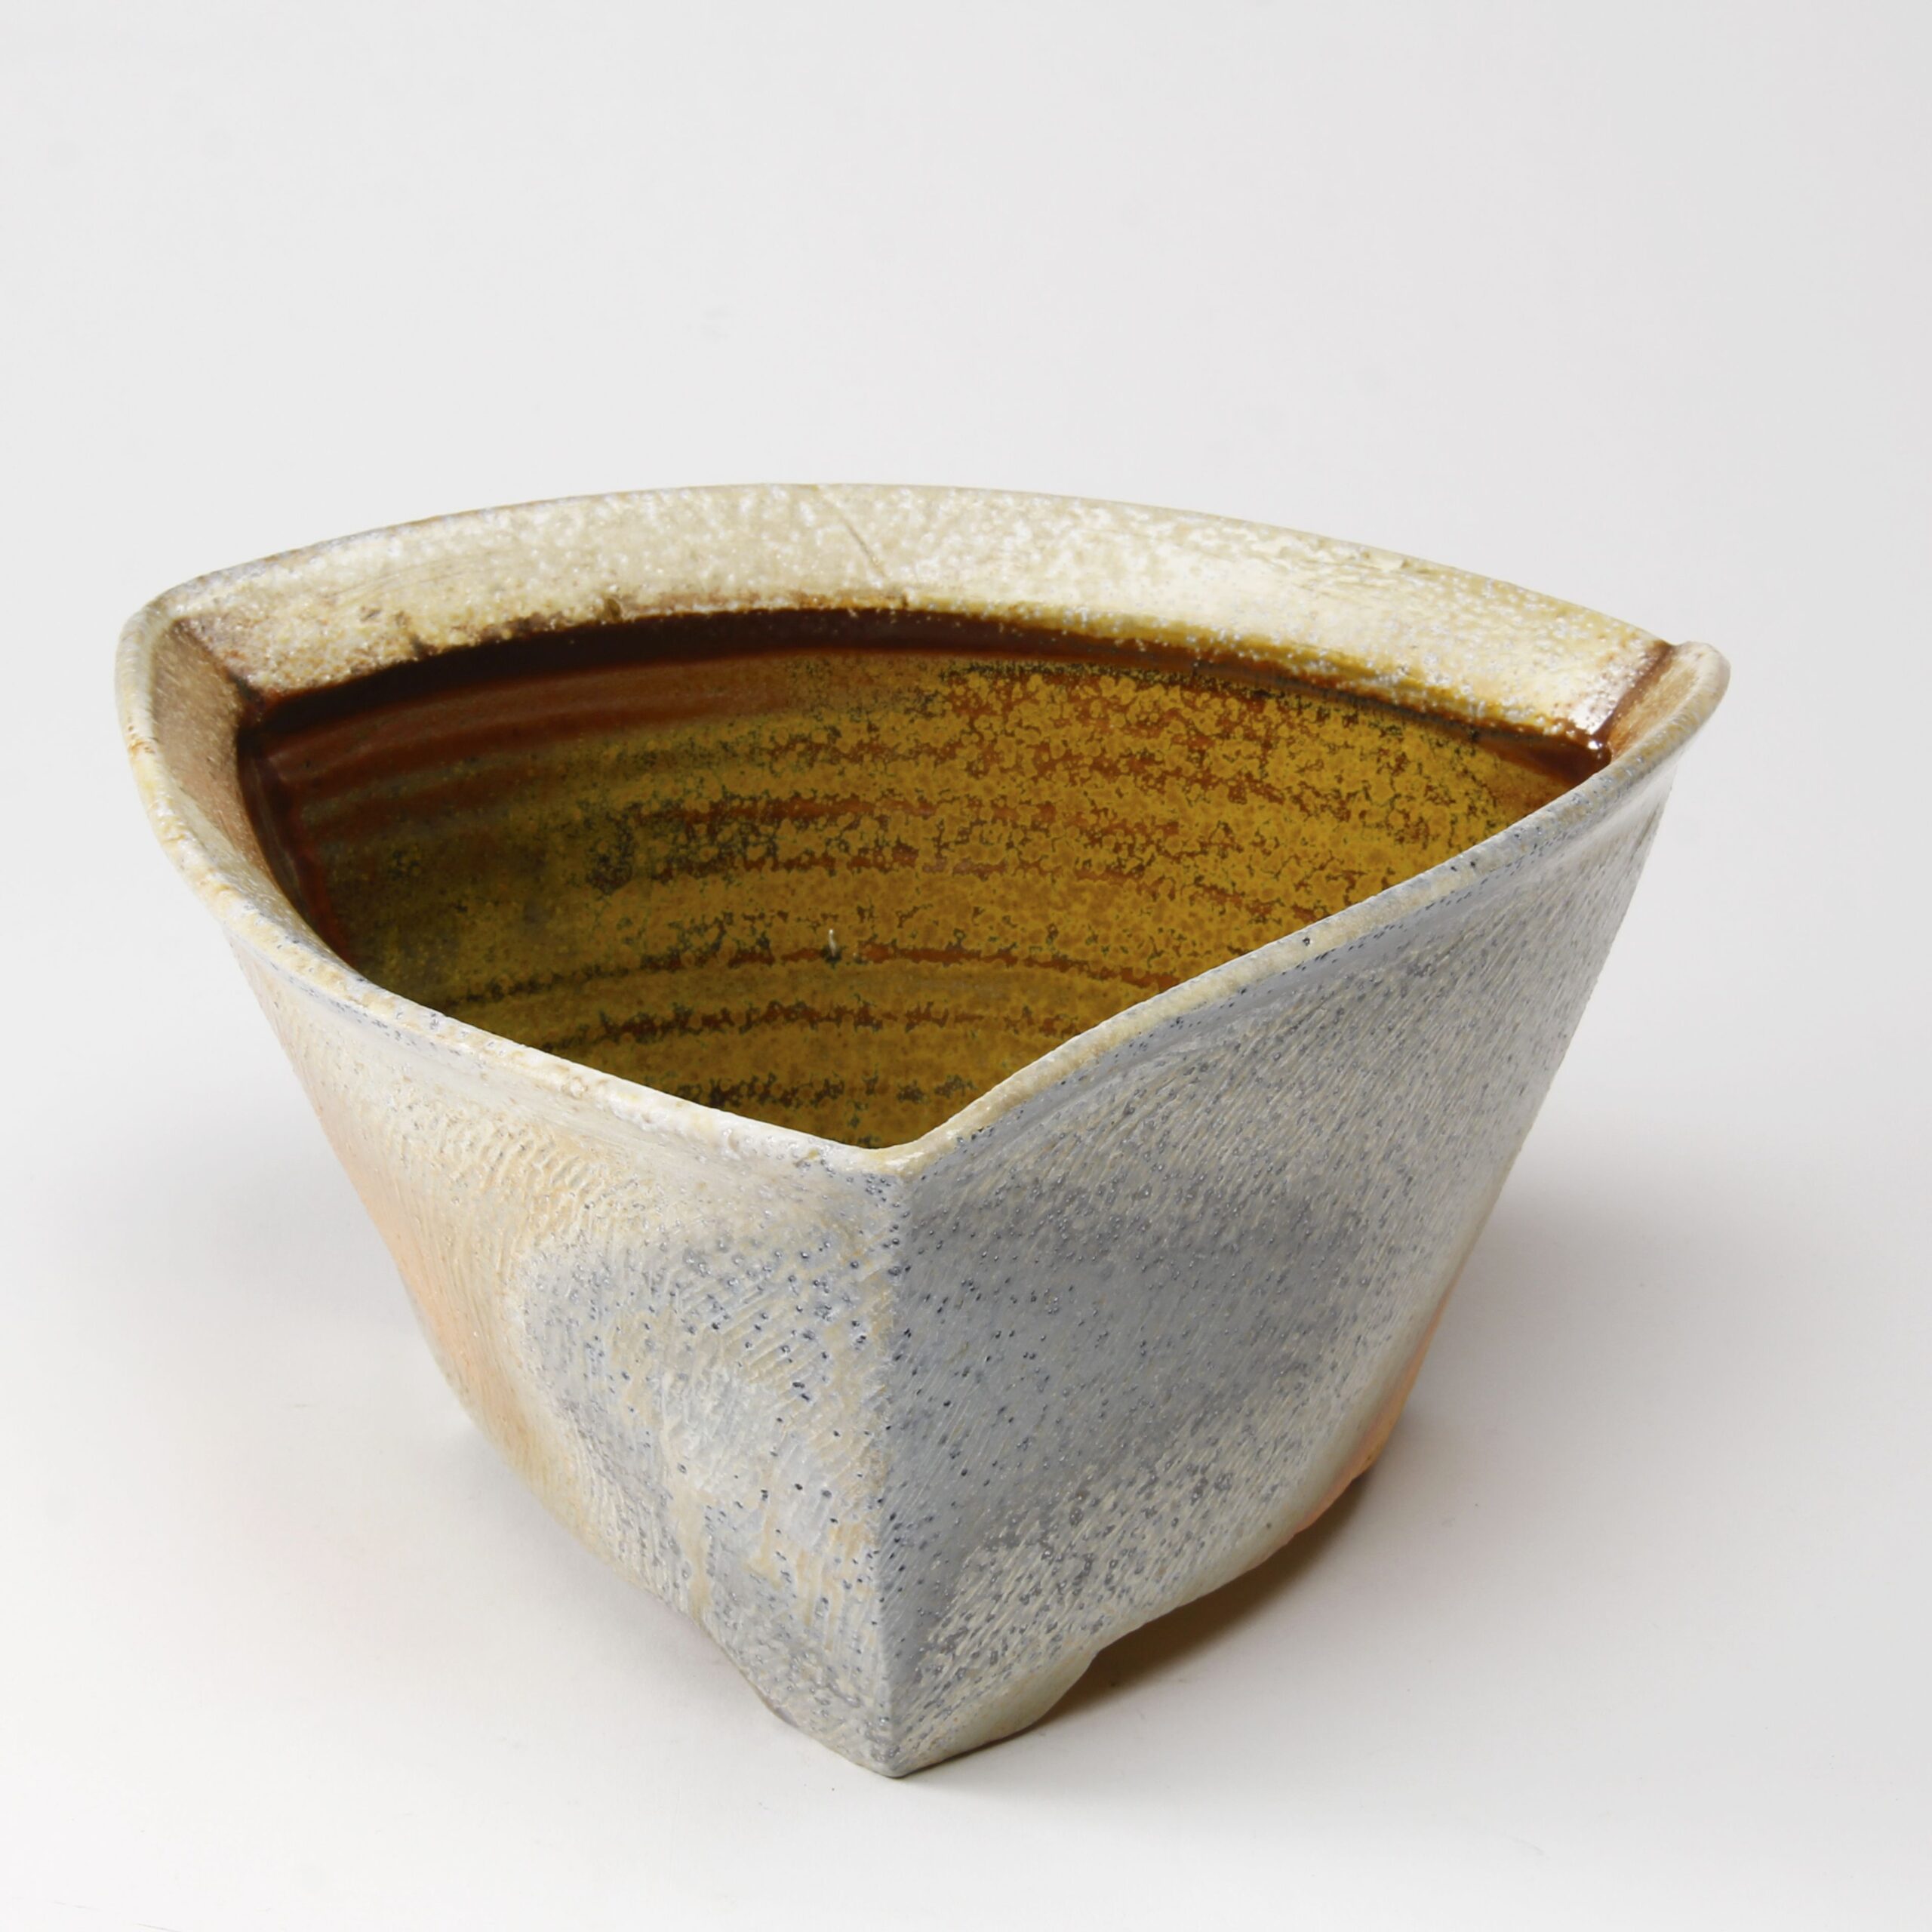 Bruce Cochrane: Triangle Bowl Product Image 4 of 4